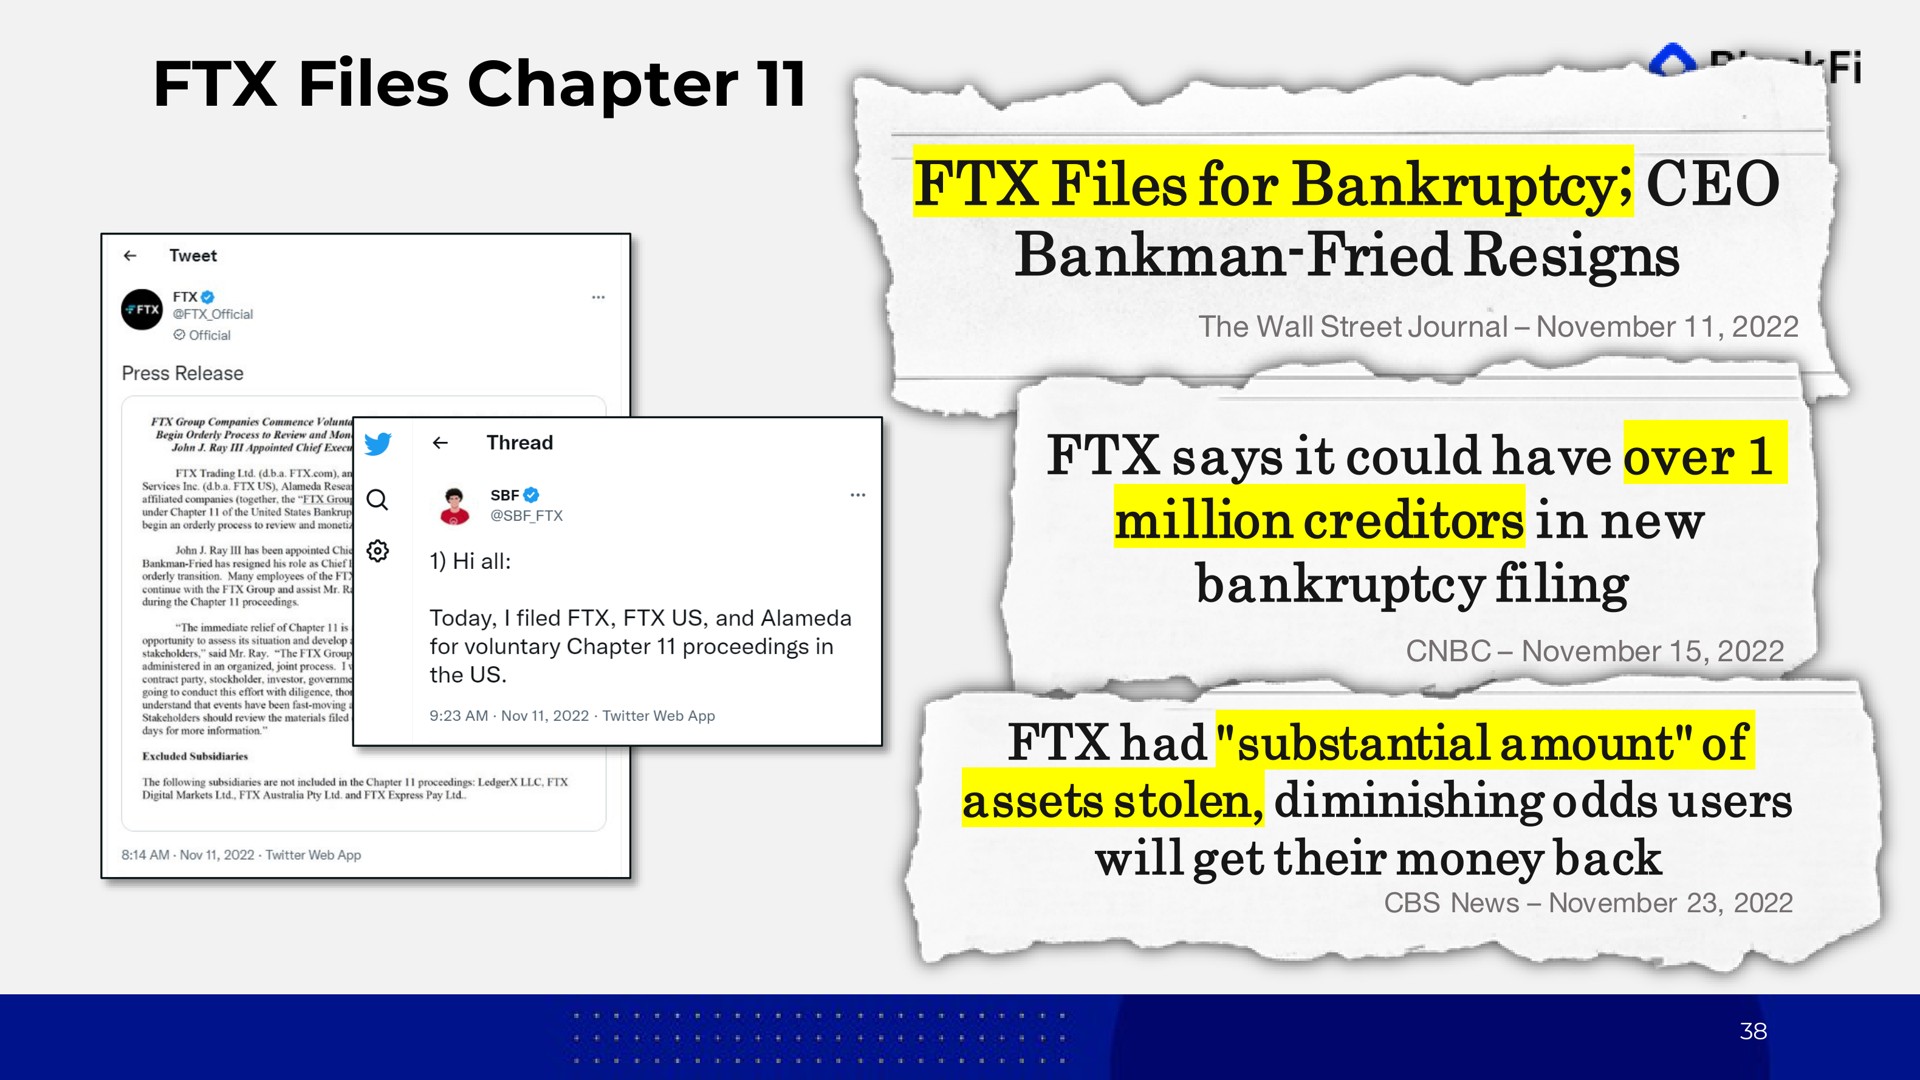 files chapter files for bankruptcy bankman fried resigns says it could have over million creditors in new bankruptcy filing had substantial amount of assets stolen diminishing odds users will get their money back a | BlockFi